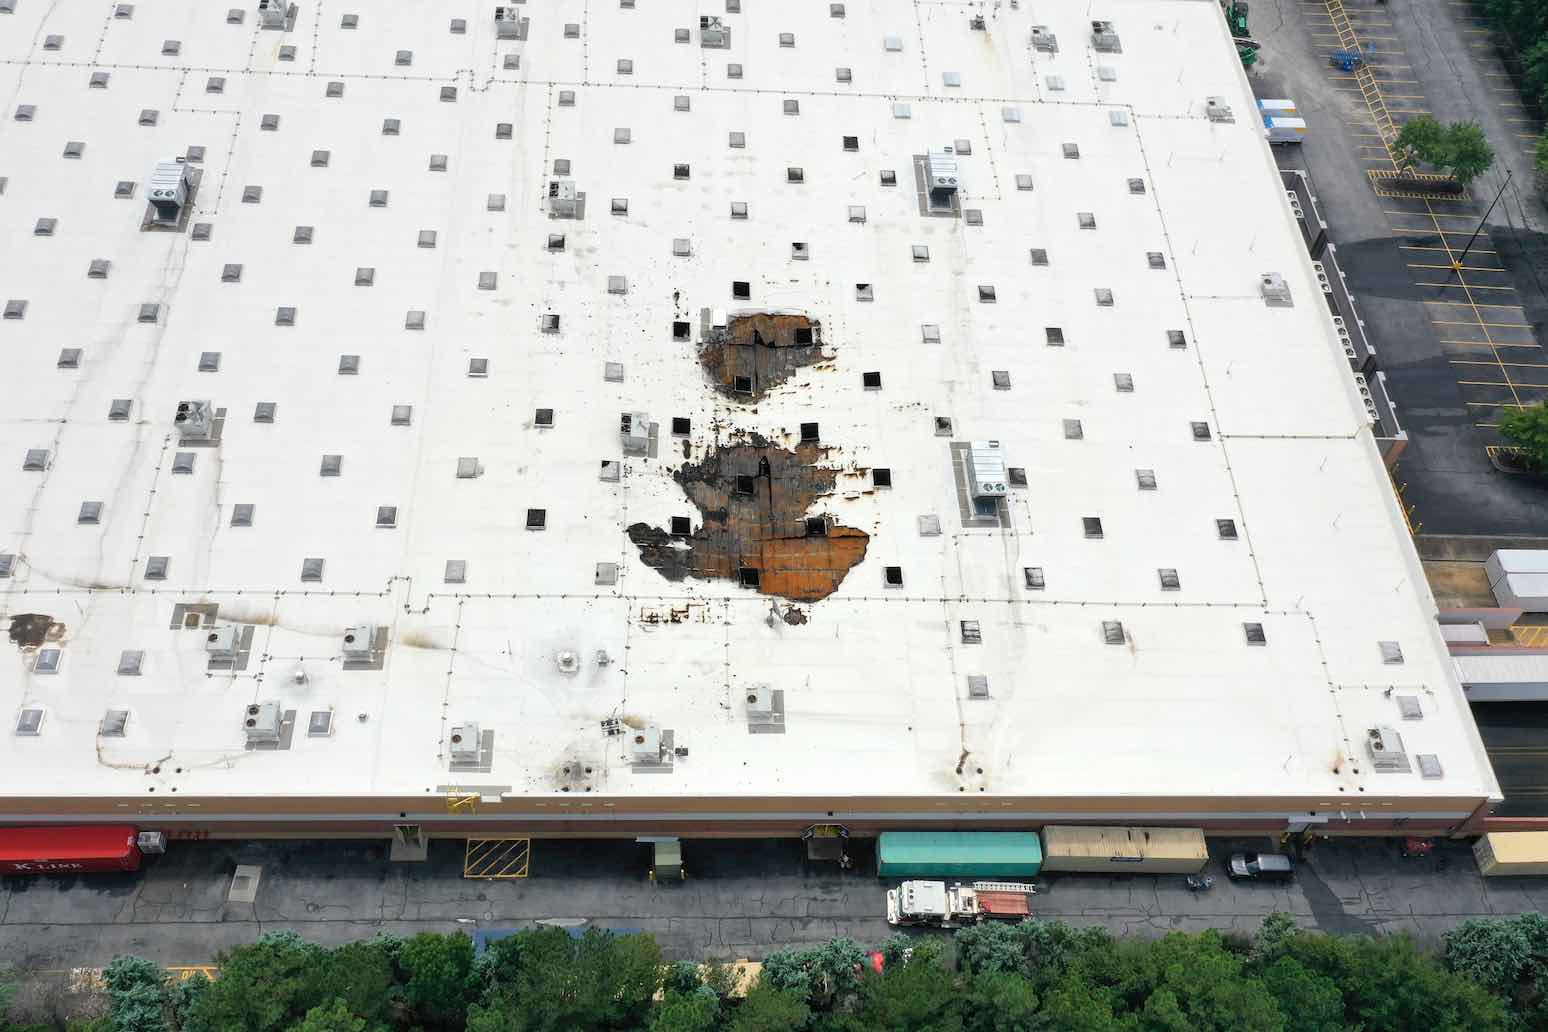 A drone view of the holes in the Walmart roof shows where a fire burned through roof struts, causing the roof to collapse. Drone photo provided by Bob Ross.